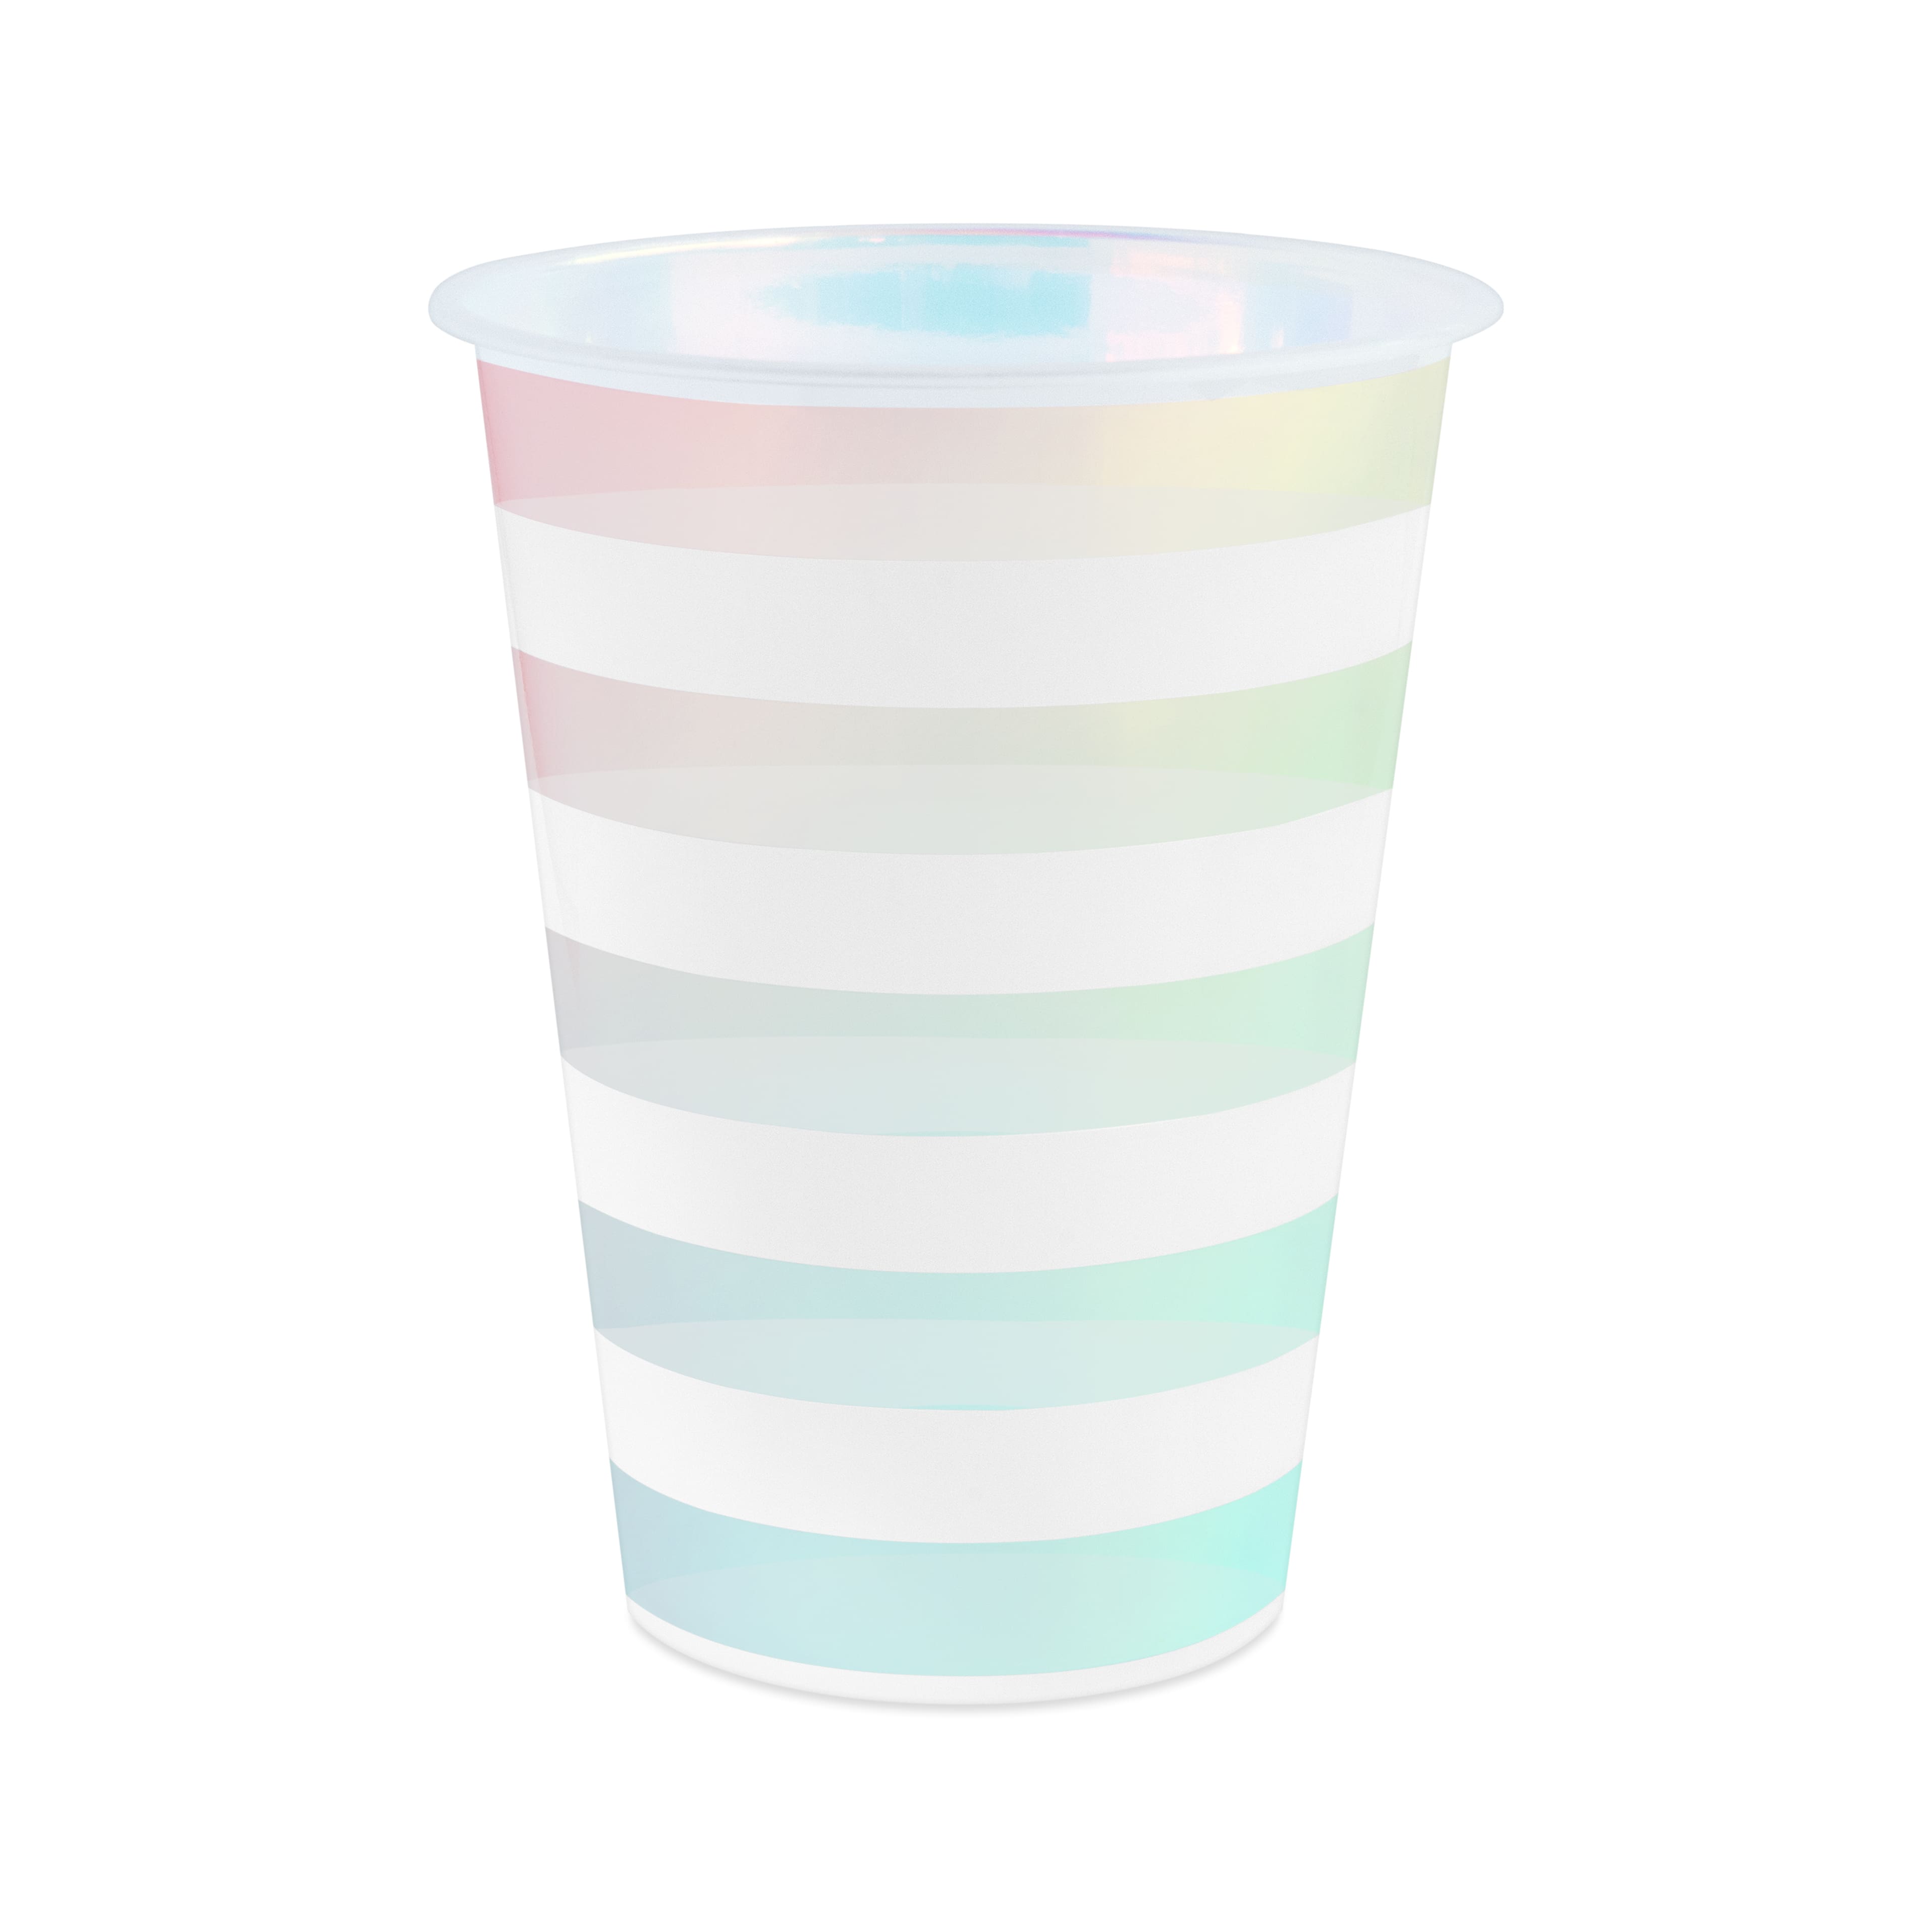 12oz. Iridescent Stripes Plastic Cups by Celebrate It®, 8ct